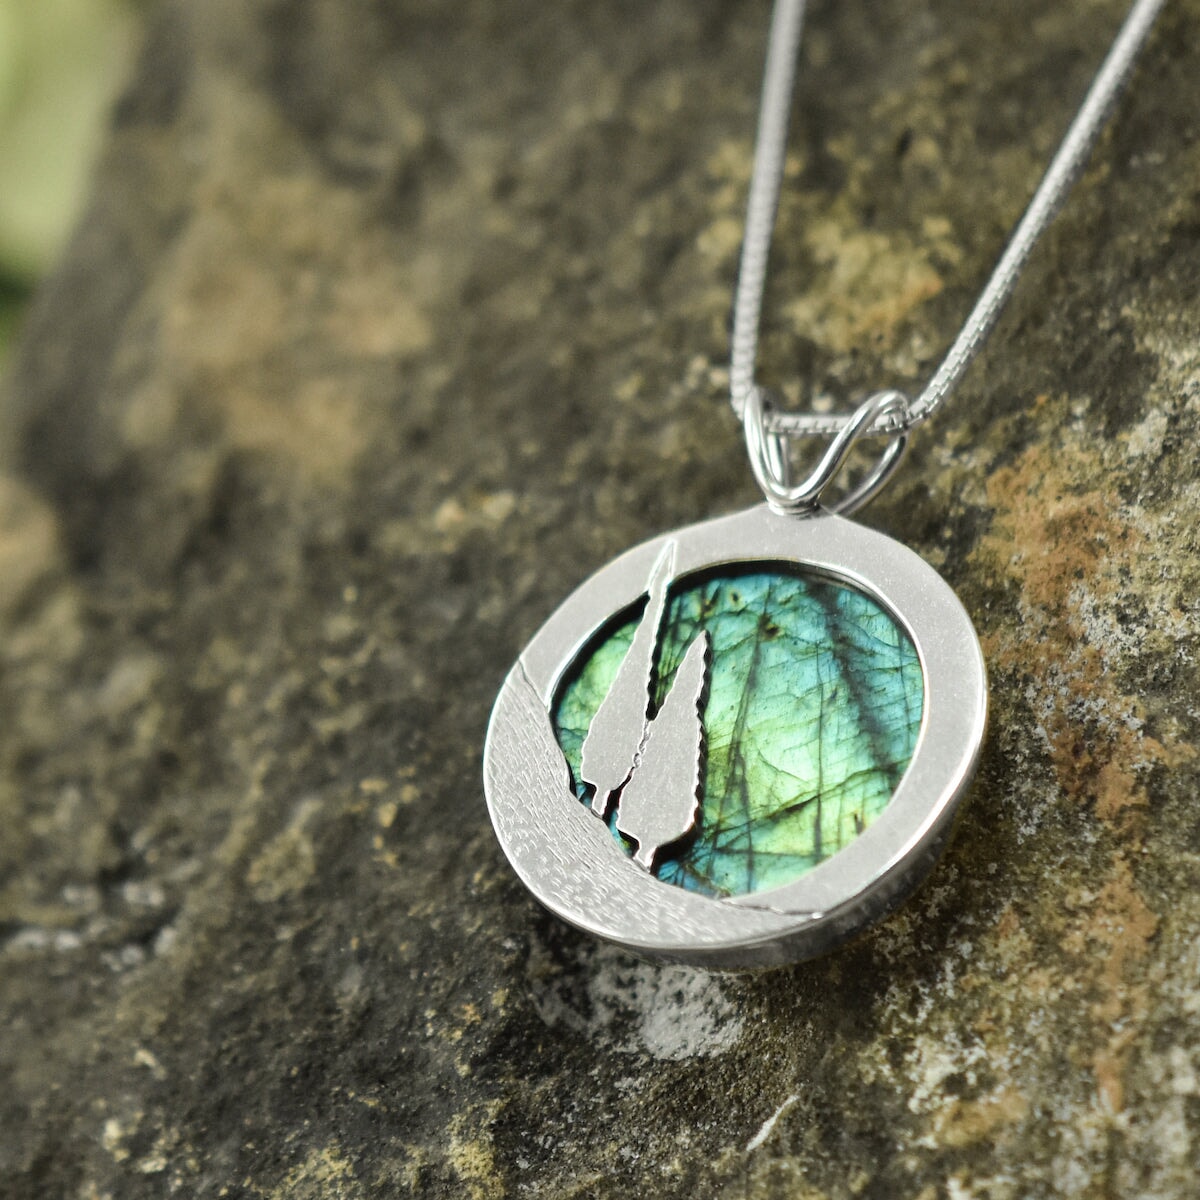 Choose Your Own Stone Reversible Round Northern Lights Pendant - Silver Pendant Stone A - 22mm Stone B - 26mm 6911 - handmade by Beth Millner Jewelry